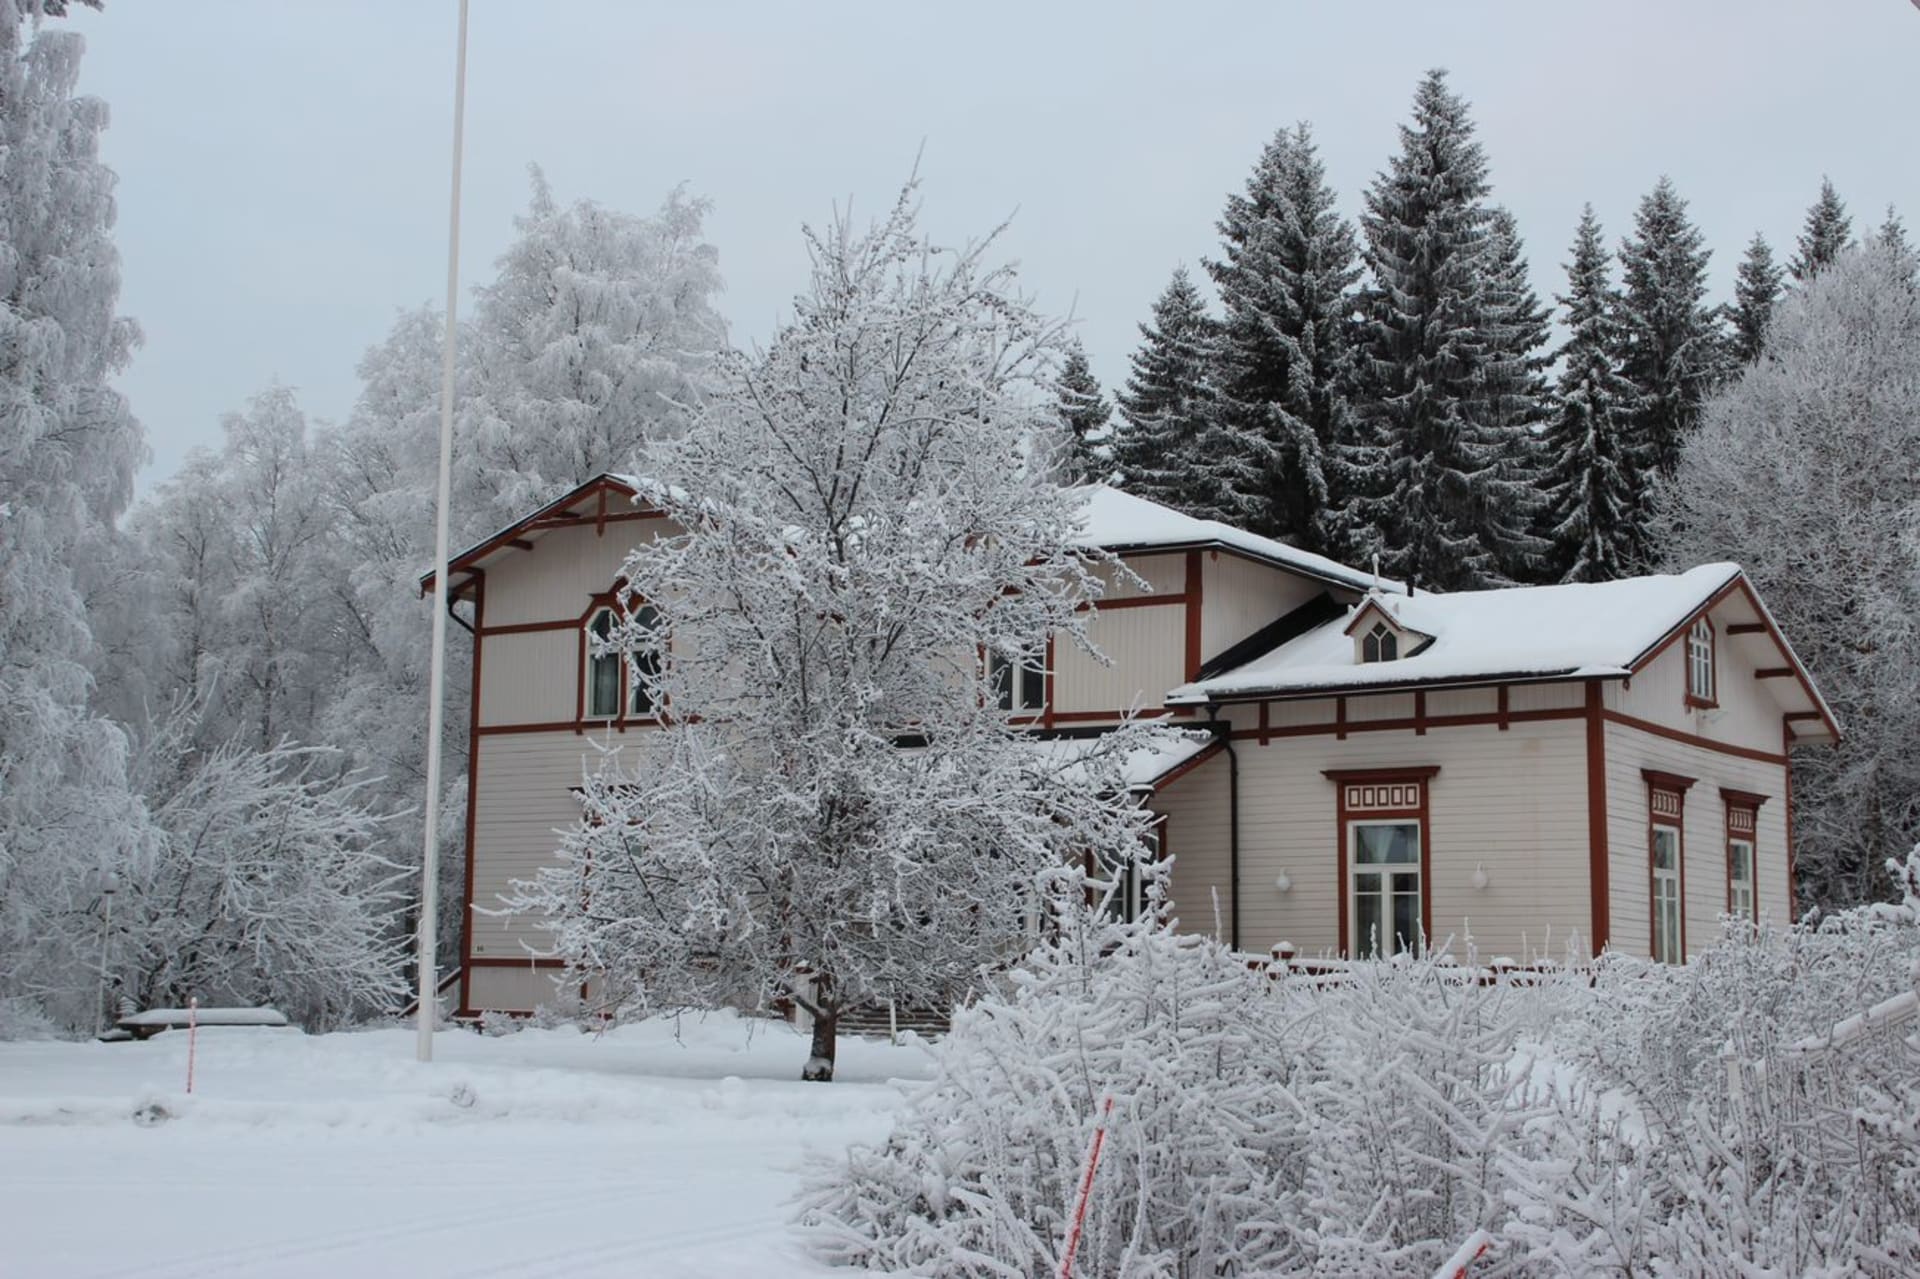 Marttinen old vicarage in winter